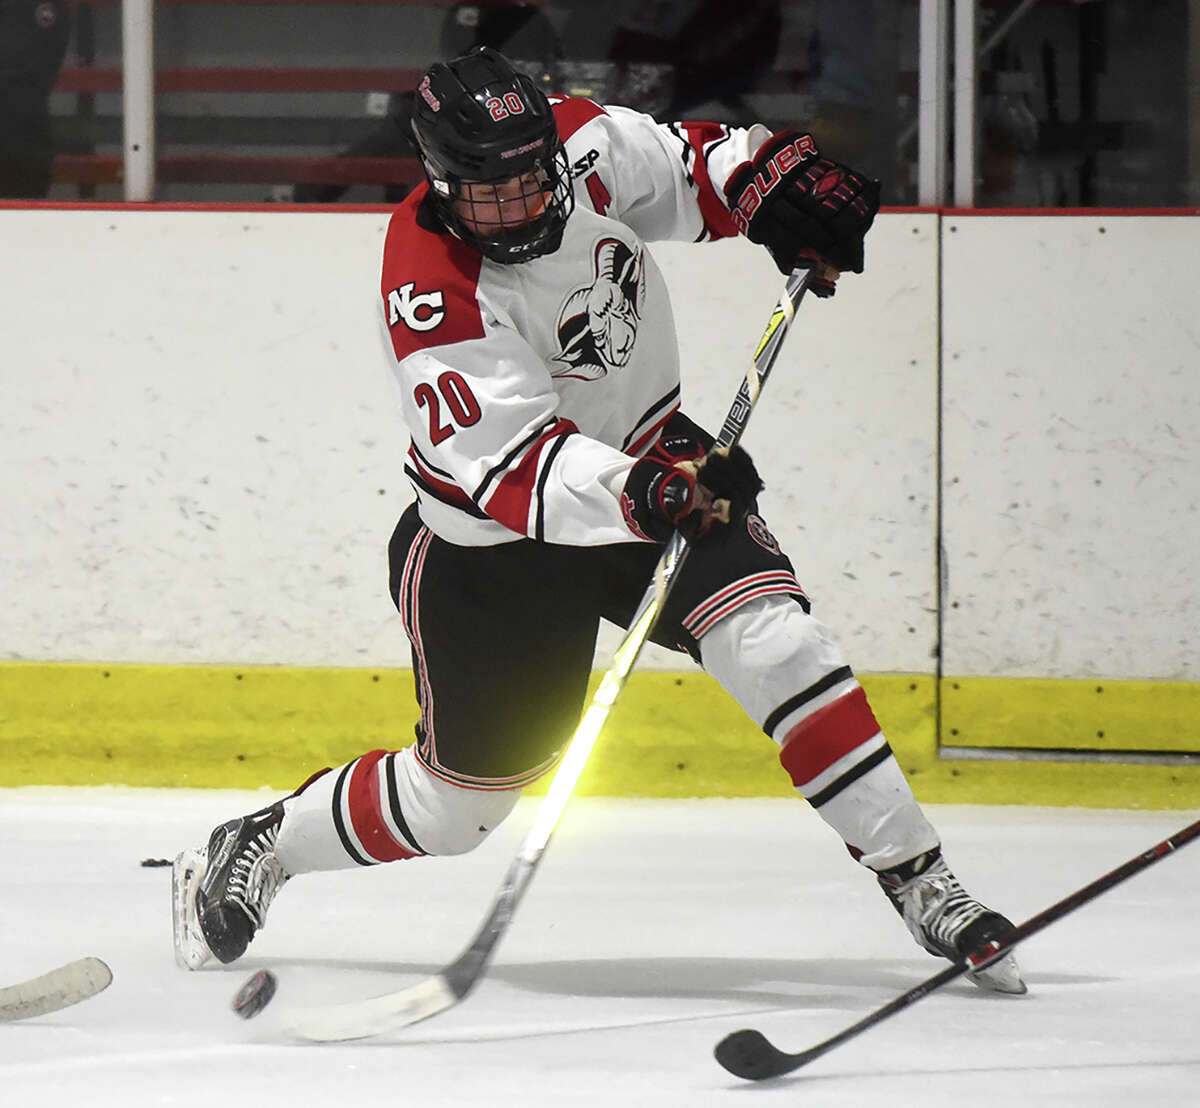 New Canaan defenseman Walker Ker takes a shot during a boys ice hockey game at the Darien Ice House on Monday, Feb. 4.